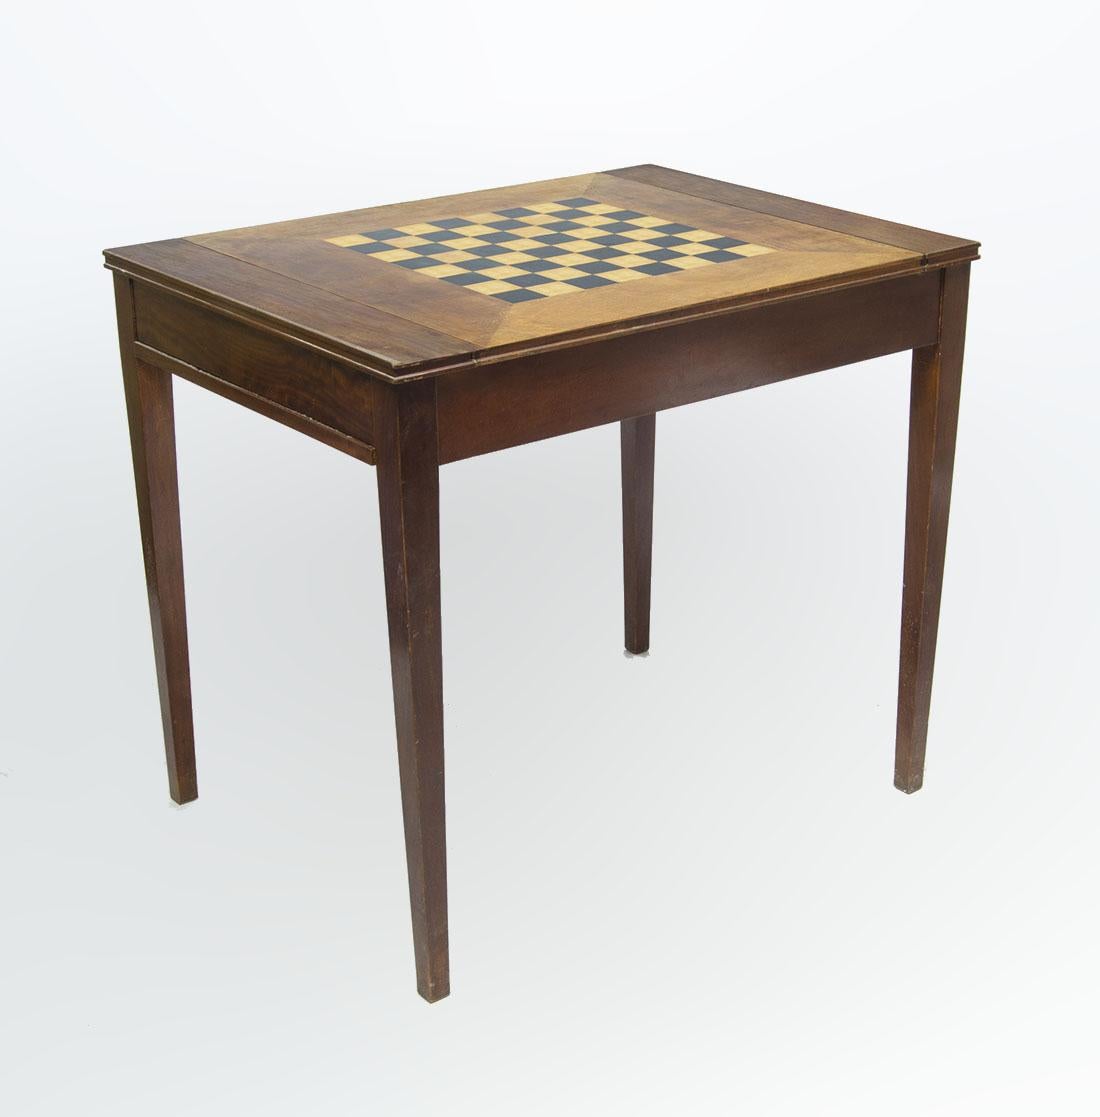 Mid-20th century argentine wooden desk/game table with chess and backgammon board by Comte S.A.

By: Comte S.A.
Material: wood, metal, leather
Technique: carved, varnished, hand-crafted, hand-carved
Dimensions: 26 in x  33.5 in x 29.5 in
Date: